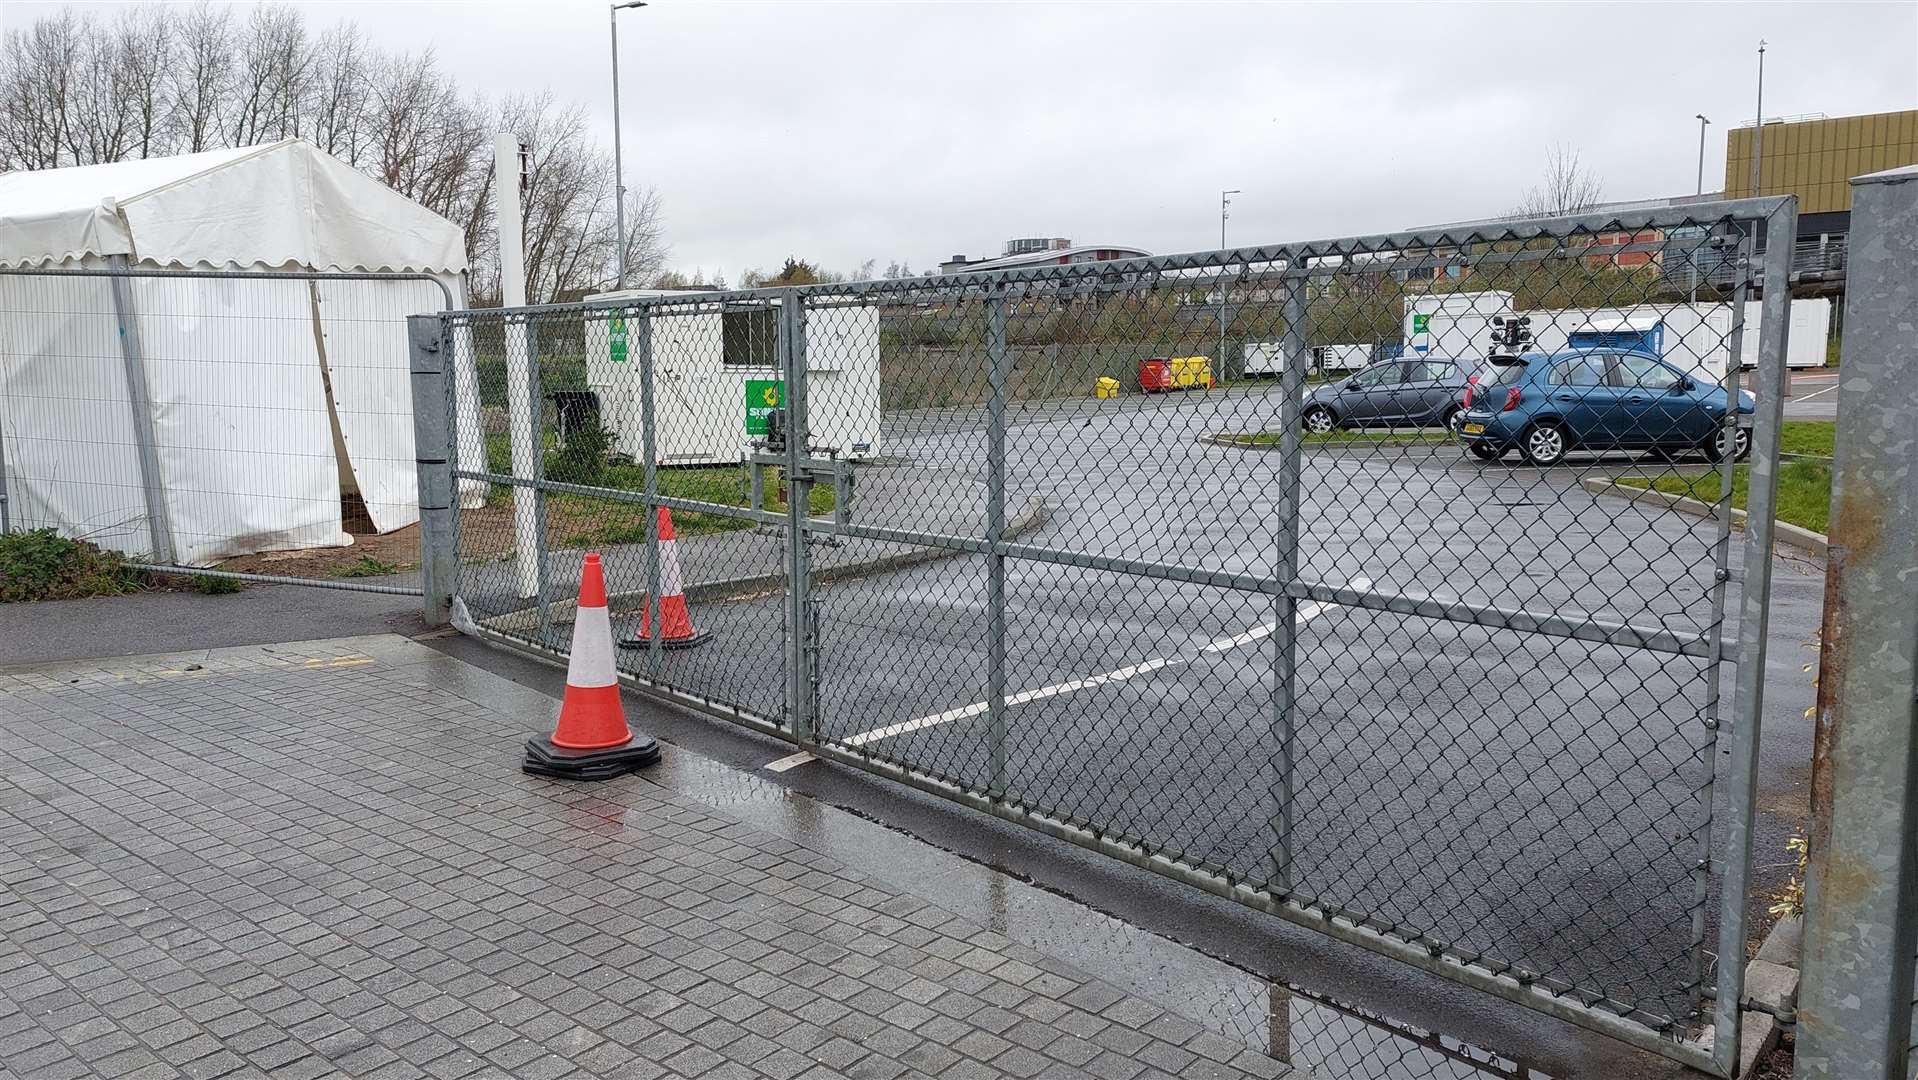 The ABC car park in Victoria Road should be open by the summer